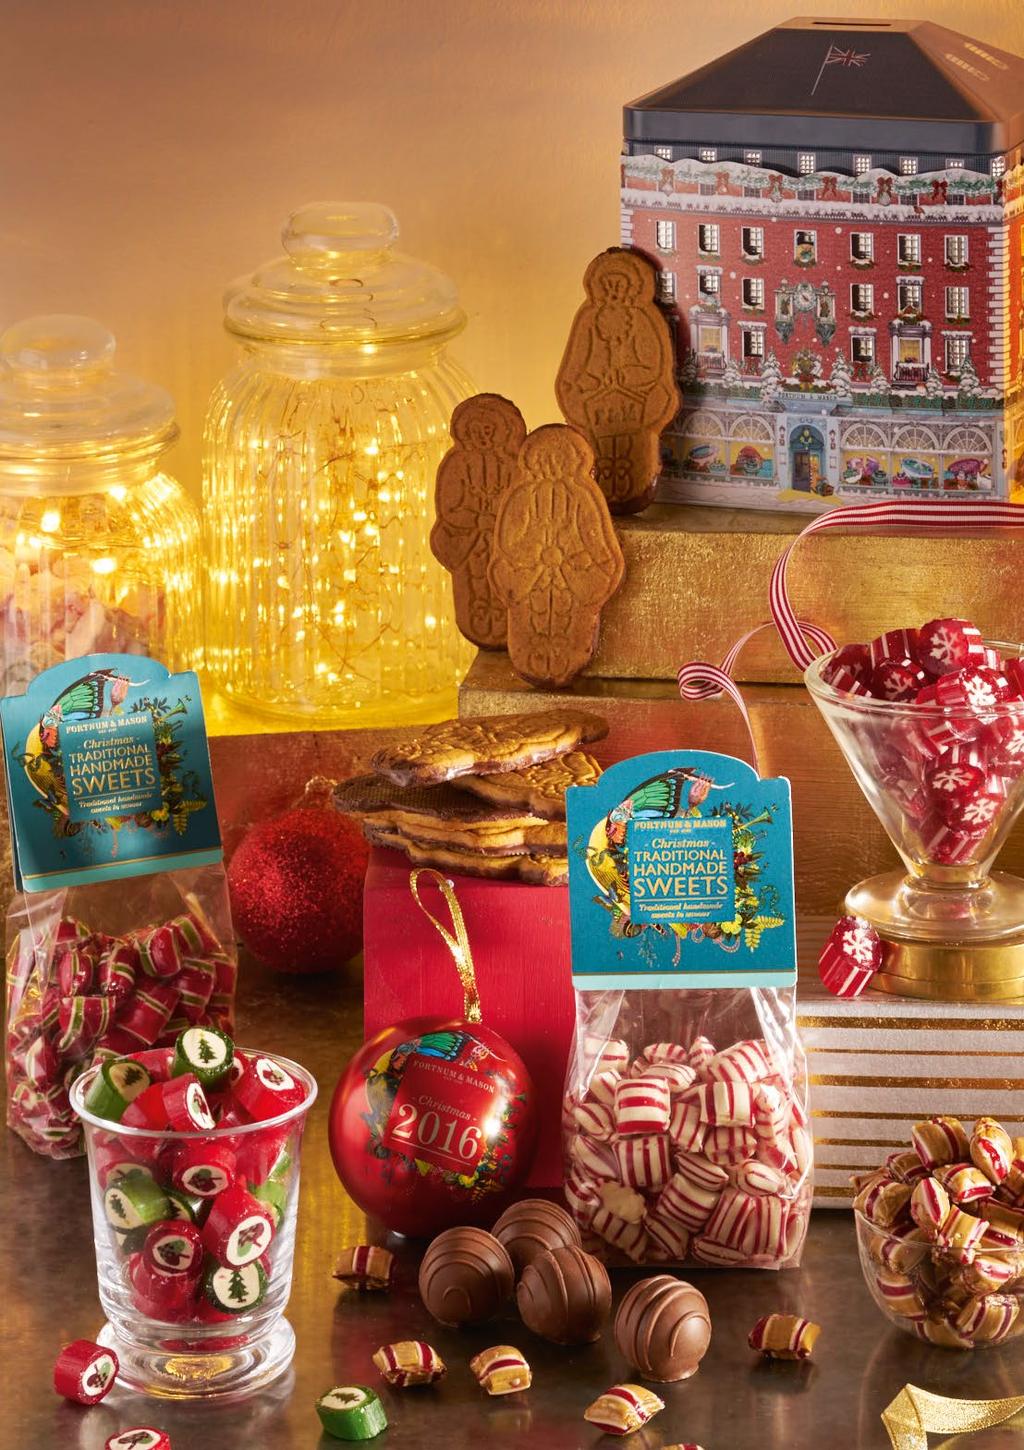 Chocolate & Sweet treats Our traditional Christmas Pillow candy is made for Fortnum's by a team of Danish artisan sweetmakers, to a secret recipe. Whatever it is, the taste is pure Christmas magic.